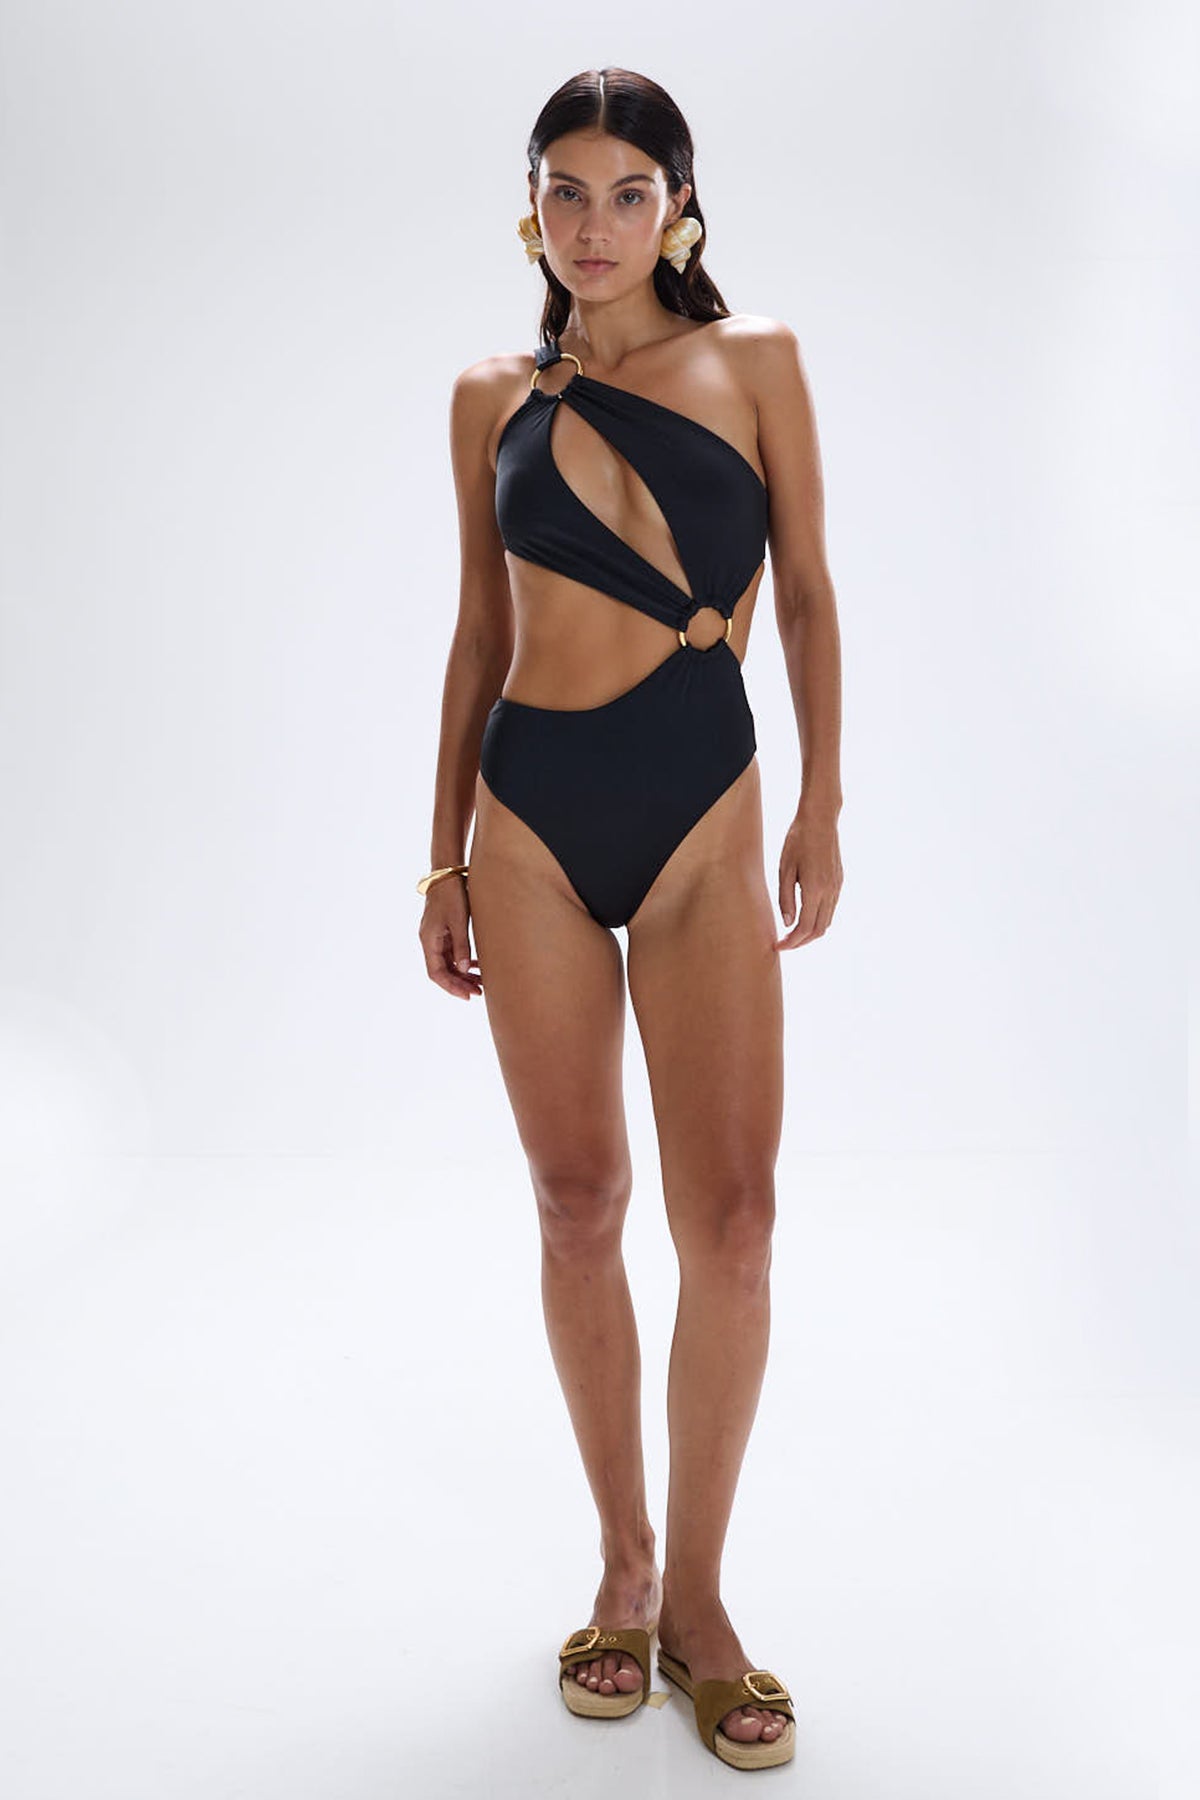 'Spectacle' Swimsuit - Black